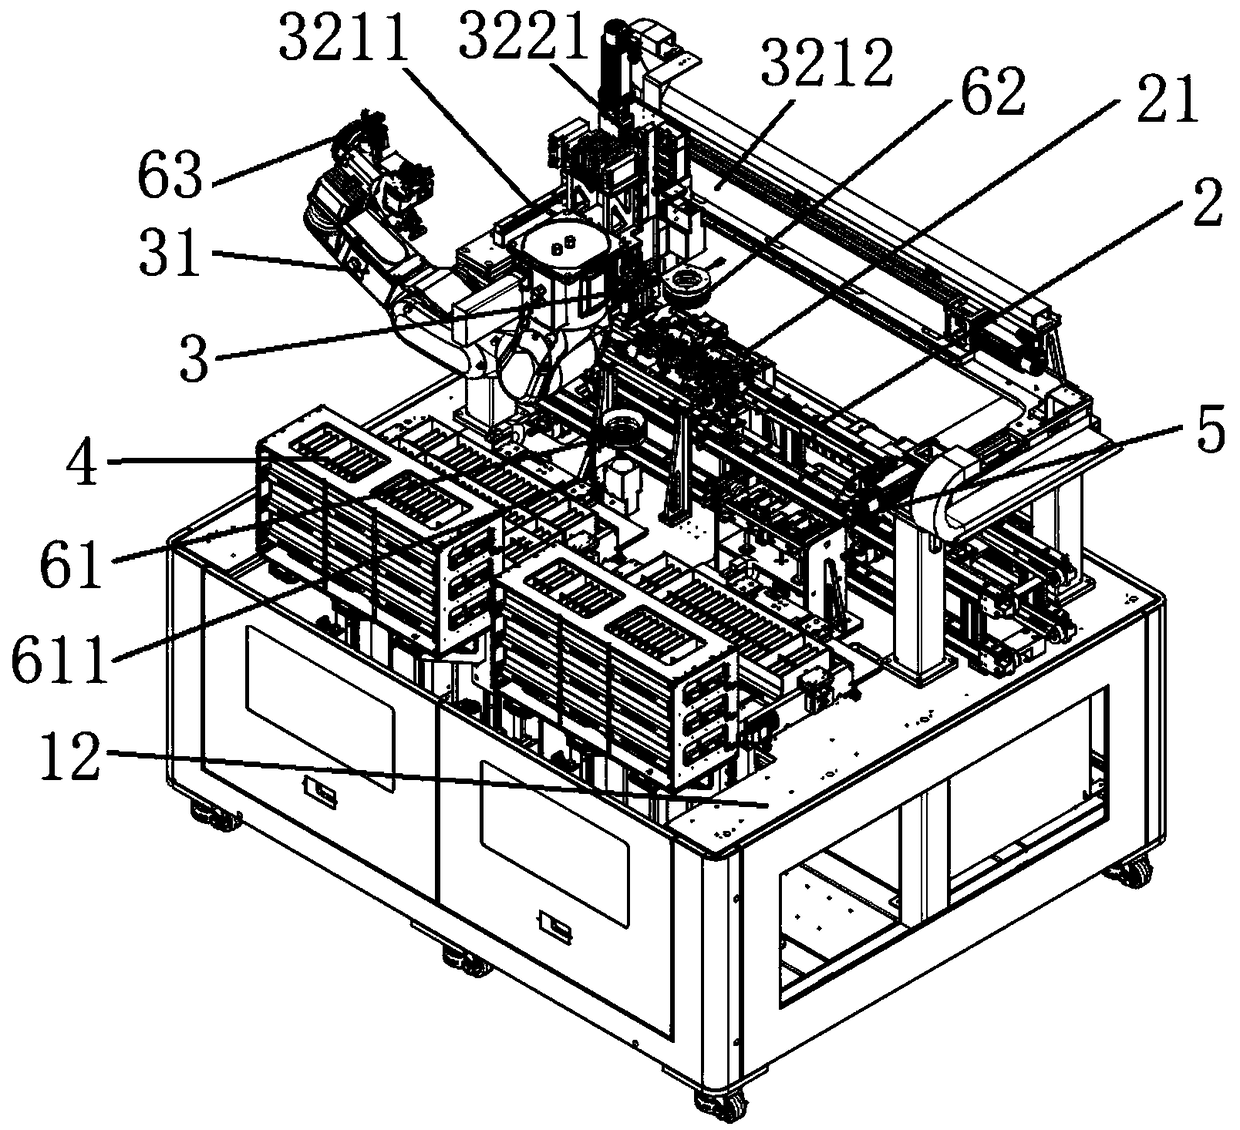 Material picking device